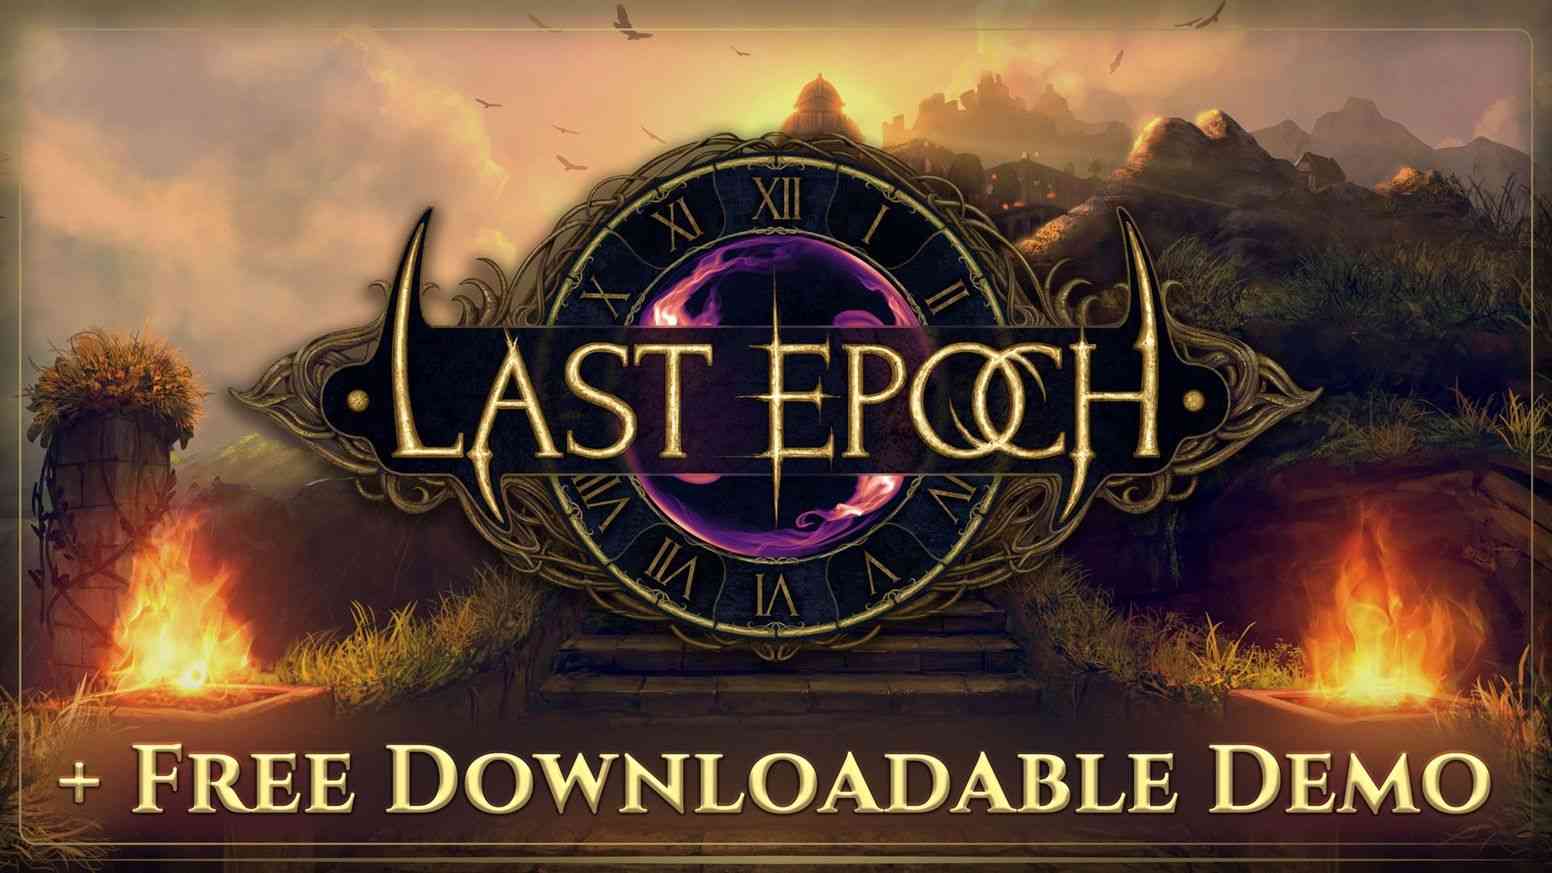 eleventh hour games launches last epoch beta on steam 2331 big 1